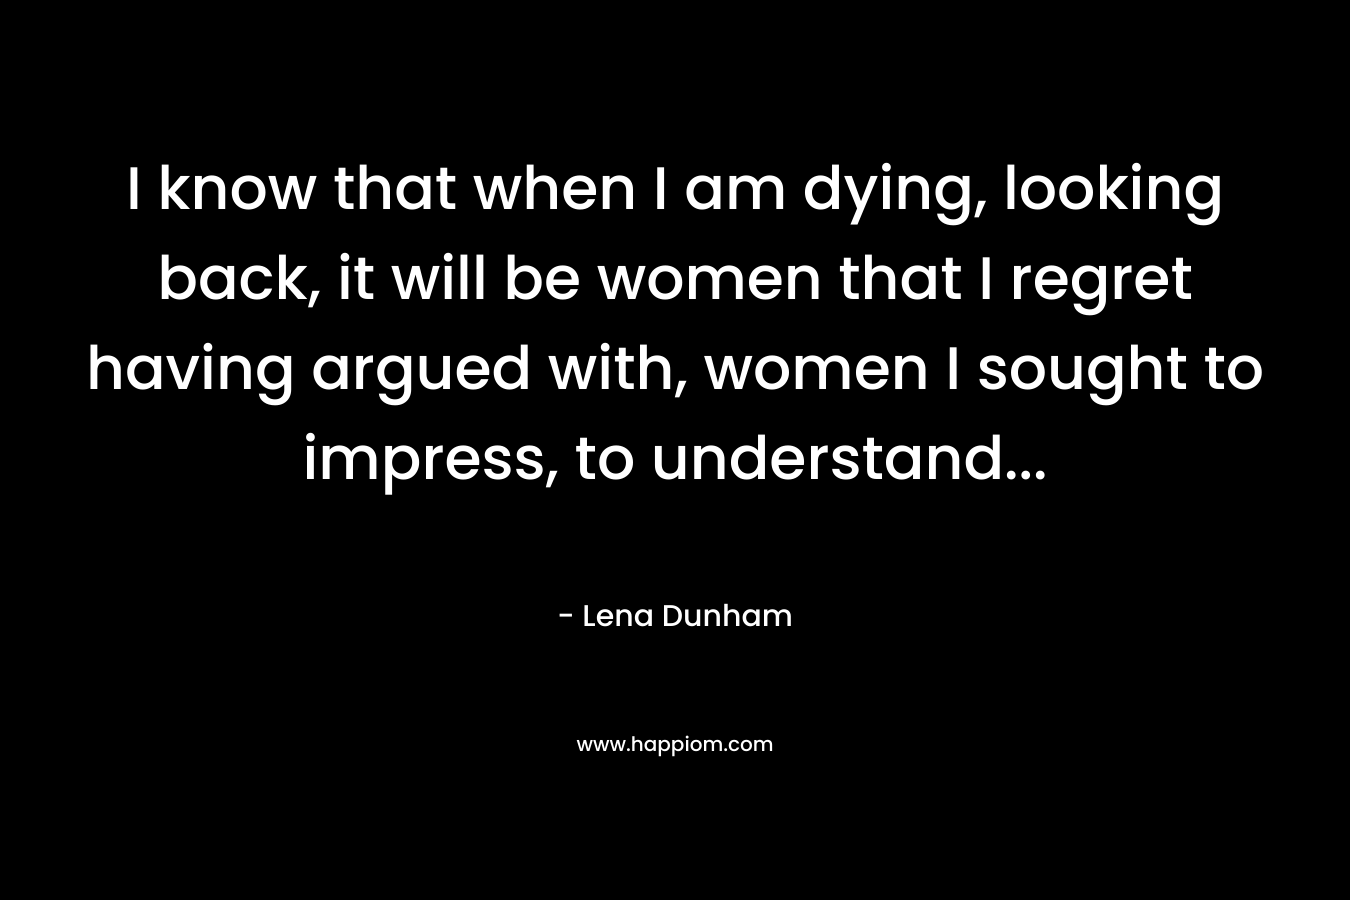 I know that when I am dying, looking back, it will be women that I regret having argued with, women I sought to impress, to understand… – Lena Dunham